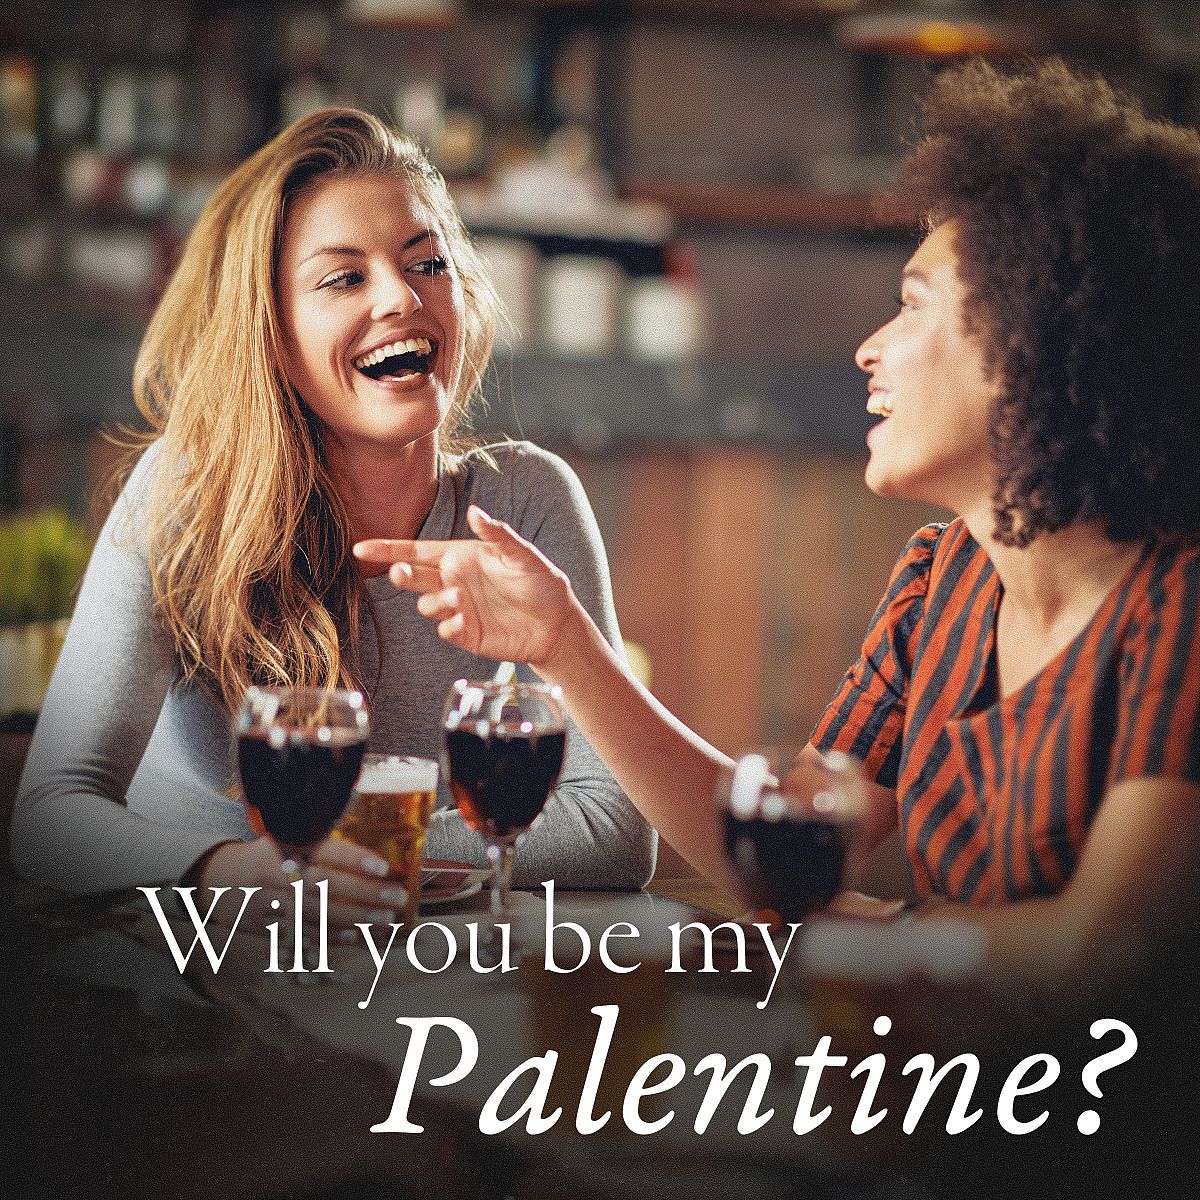 Will you be my Palentine?